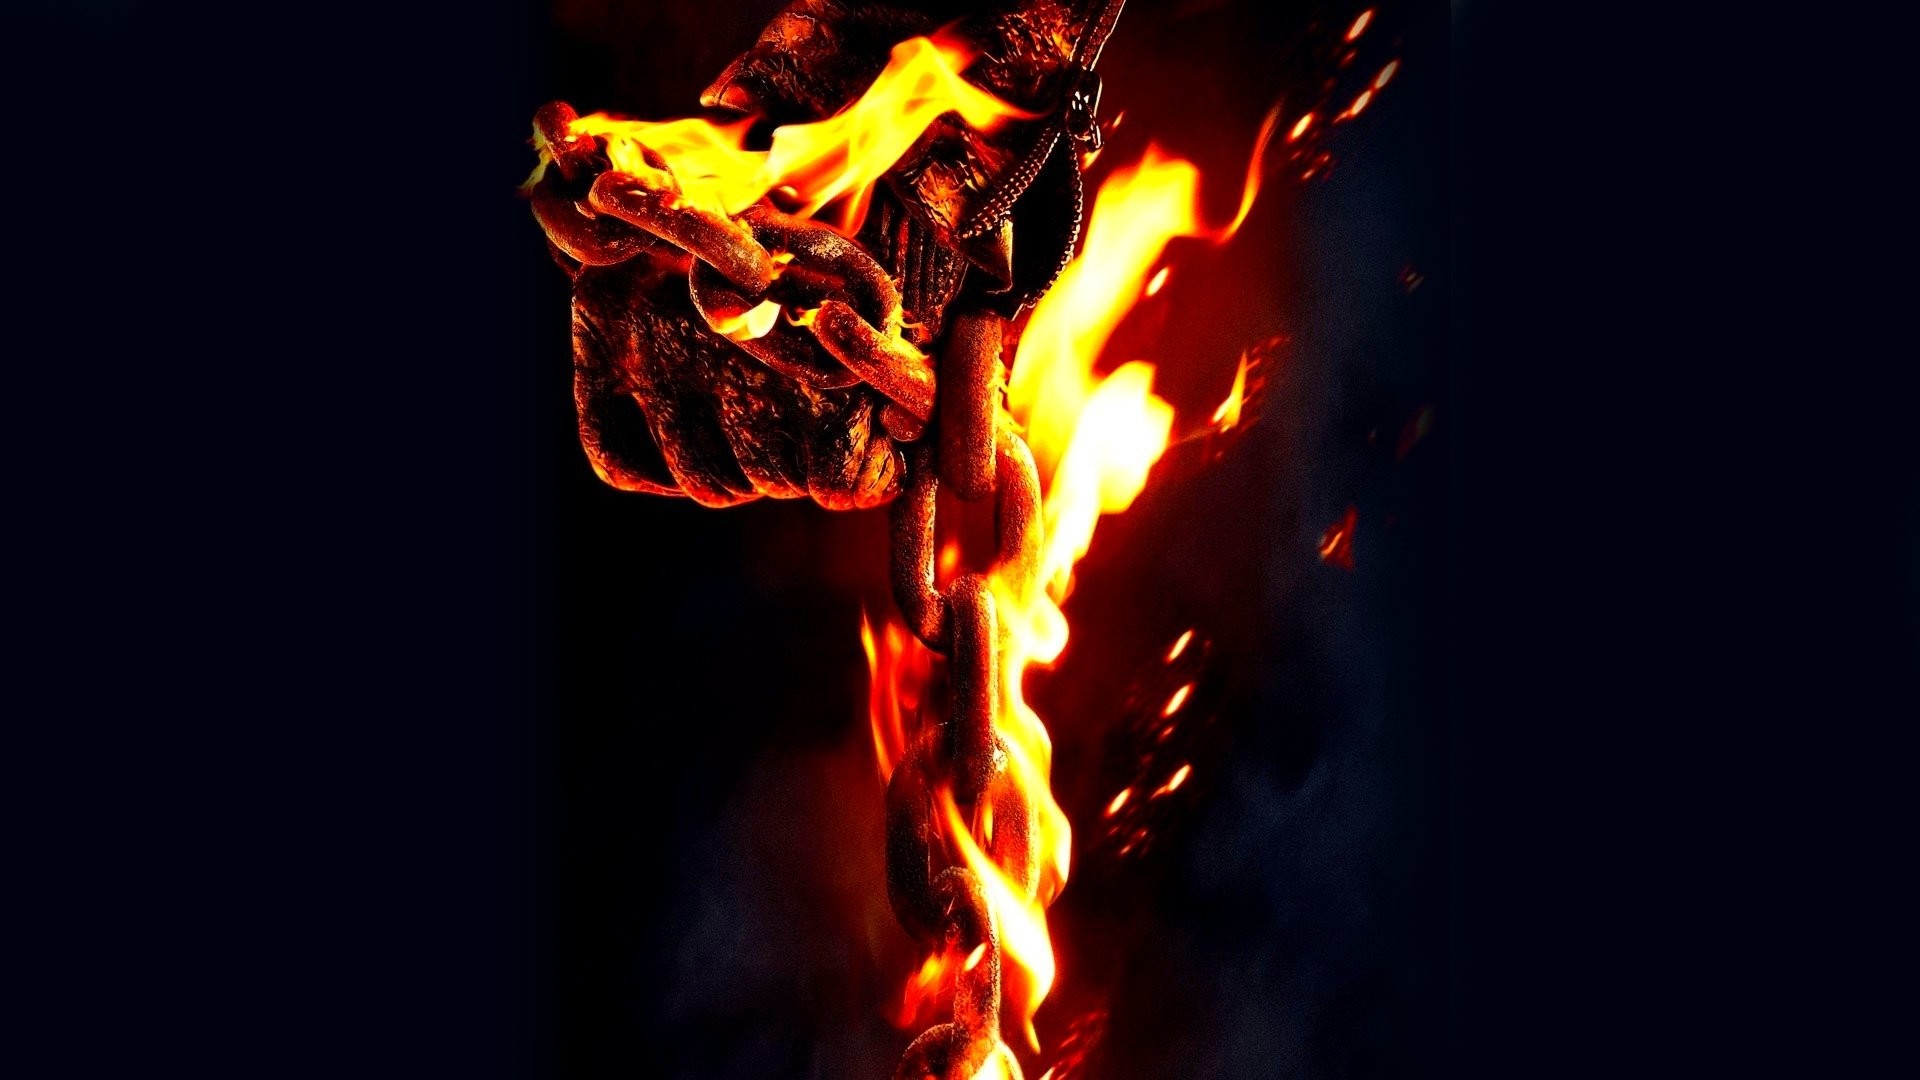 Ghost Rider Skull Wallpaper 61 Pictures